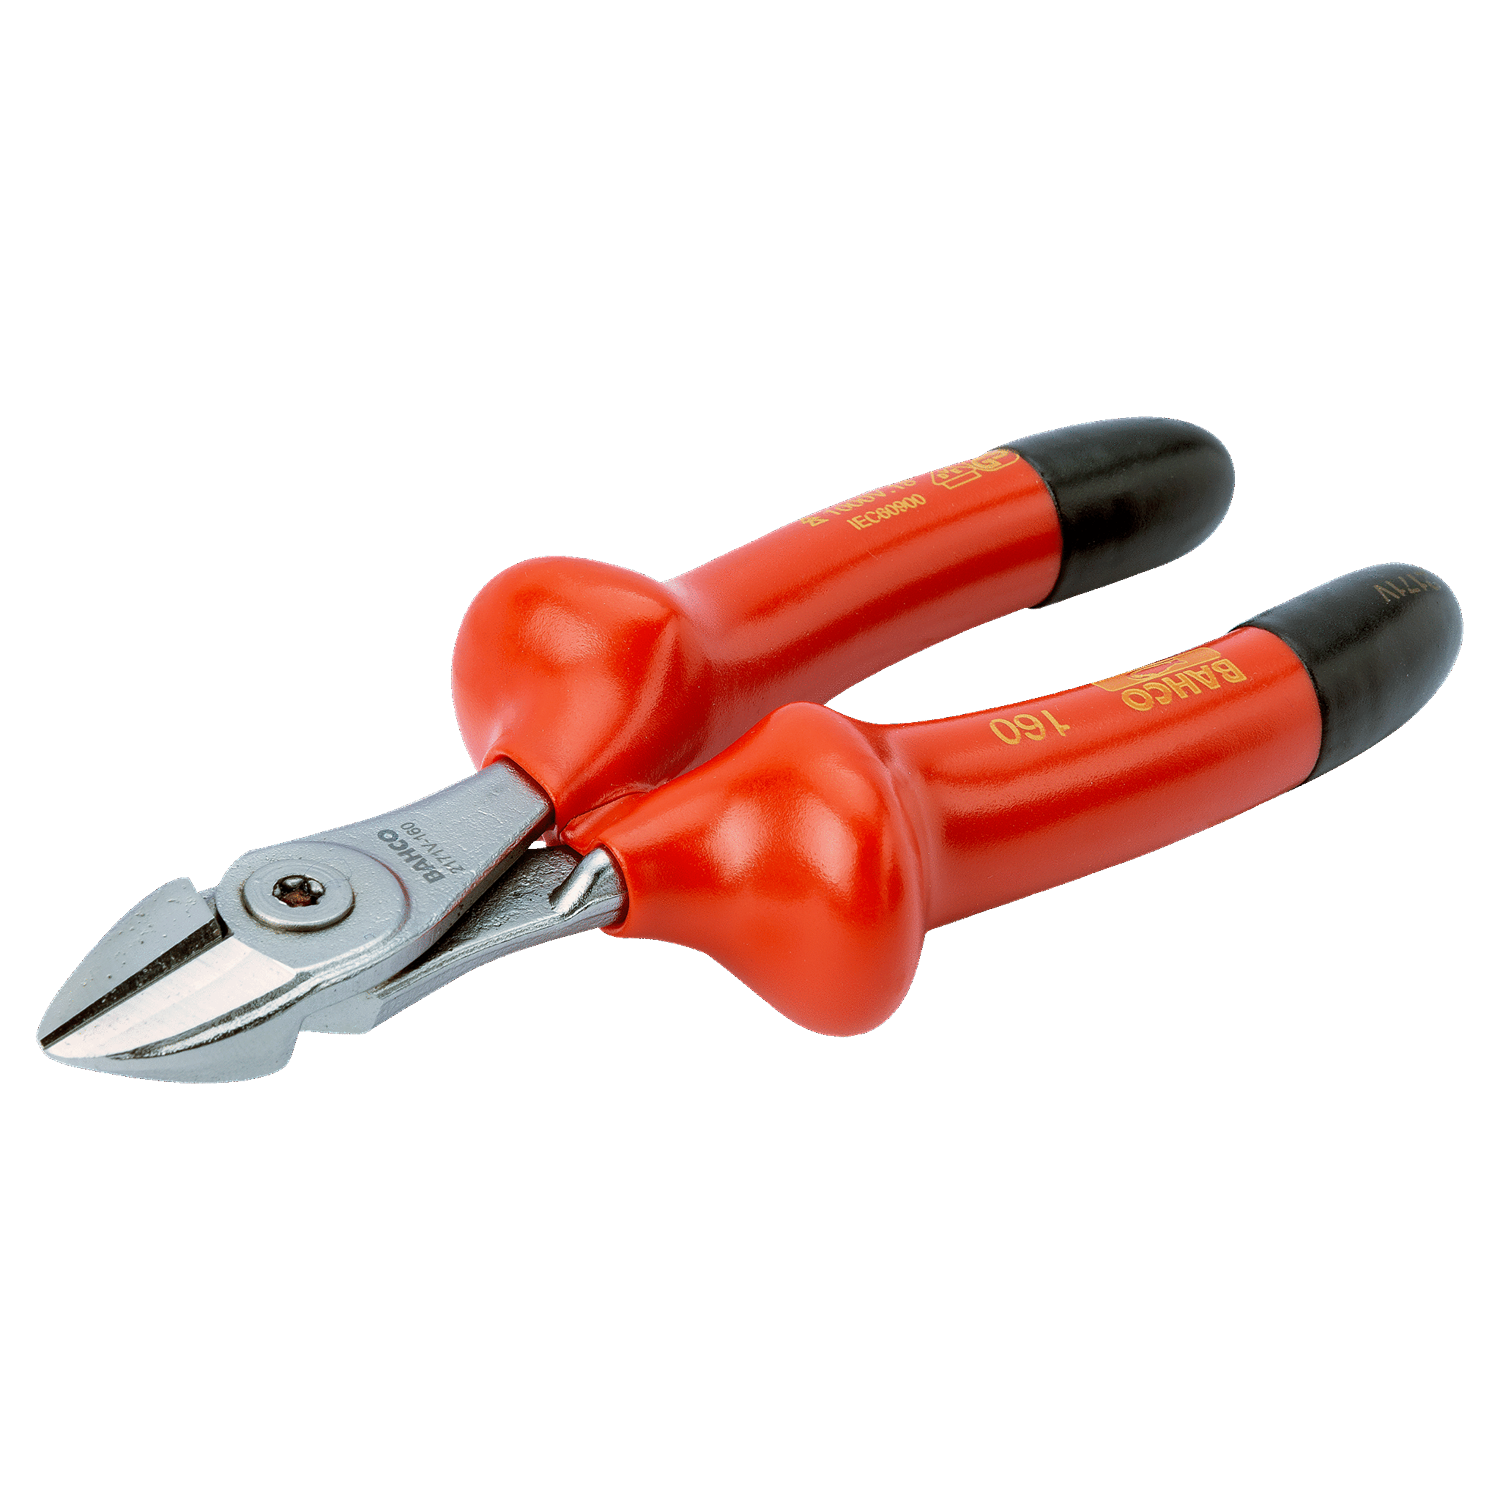 BAHCO 2171V VDE Insulated Side Diagonal Cutter Pliers - Premium Diagonal Cutter from BAHCO - Shop now at Yew Aik.